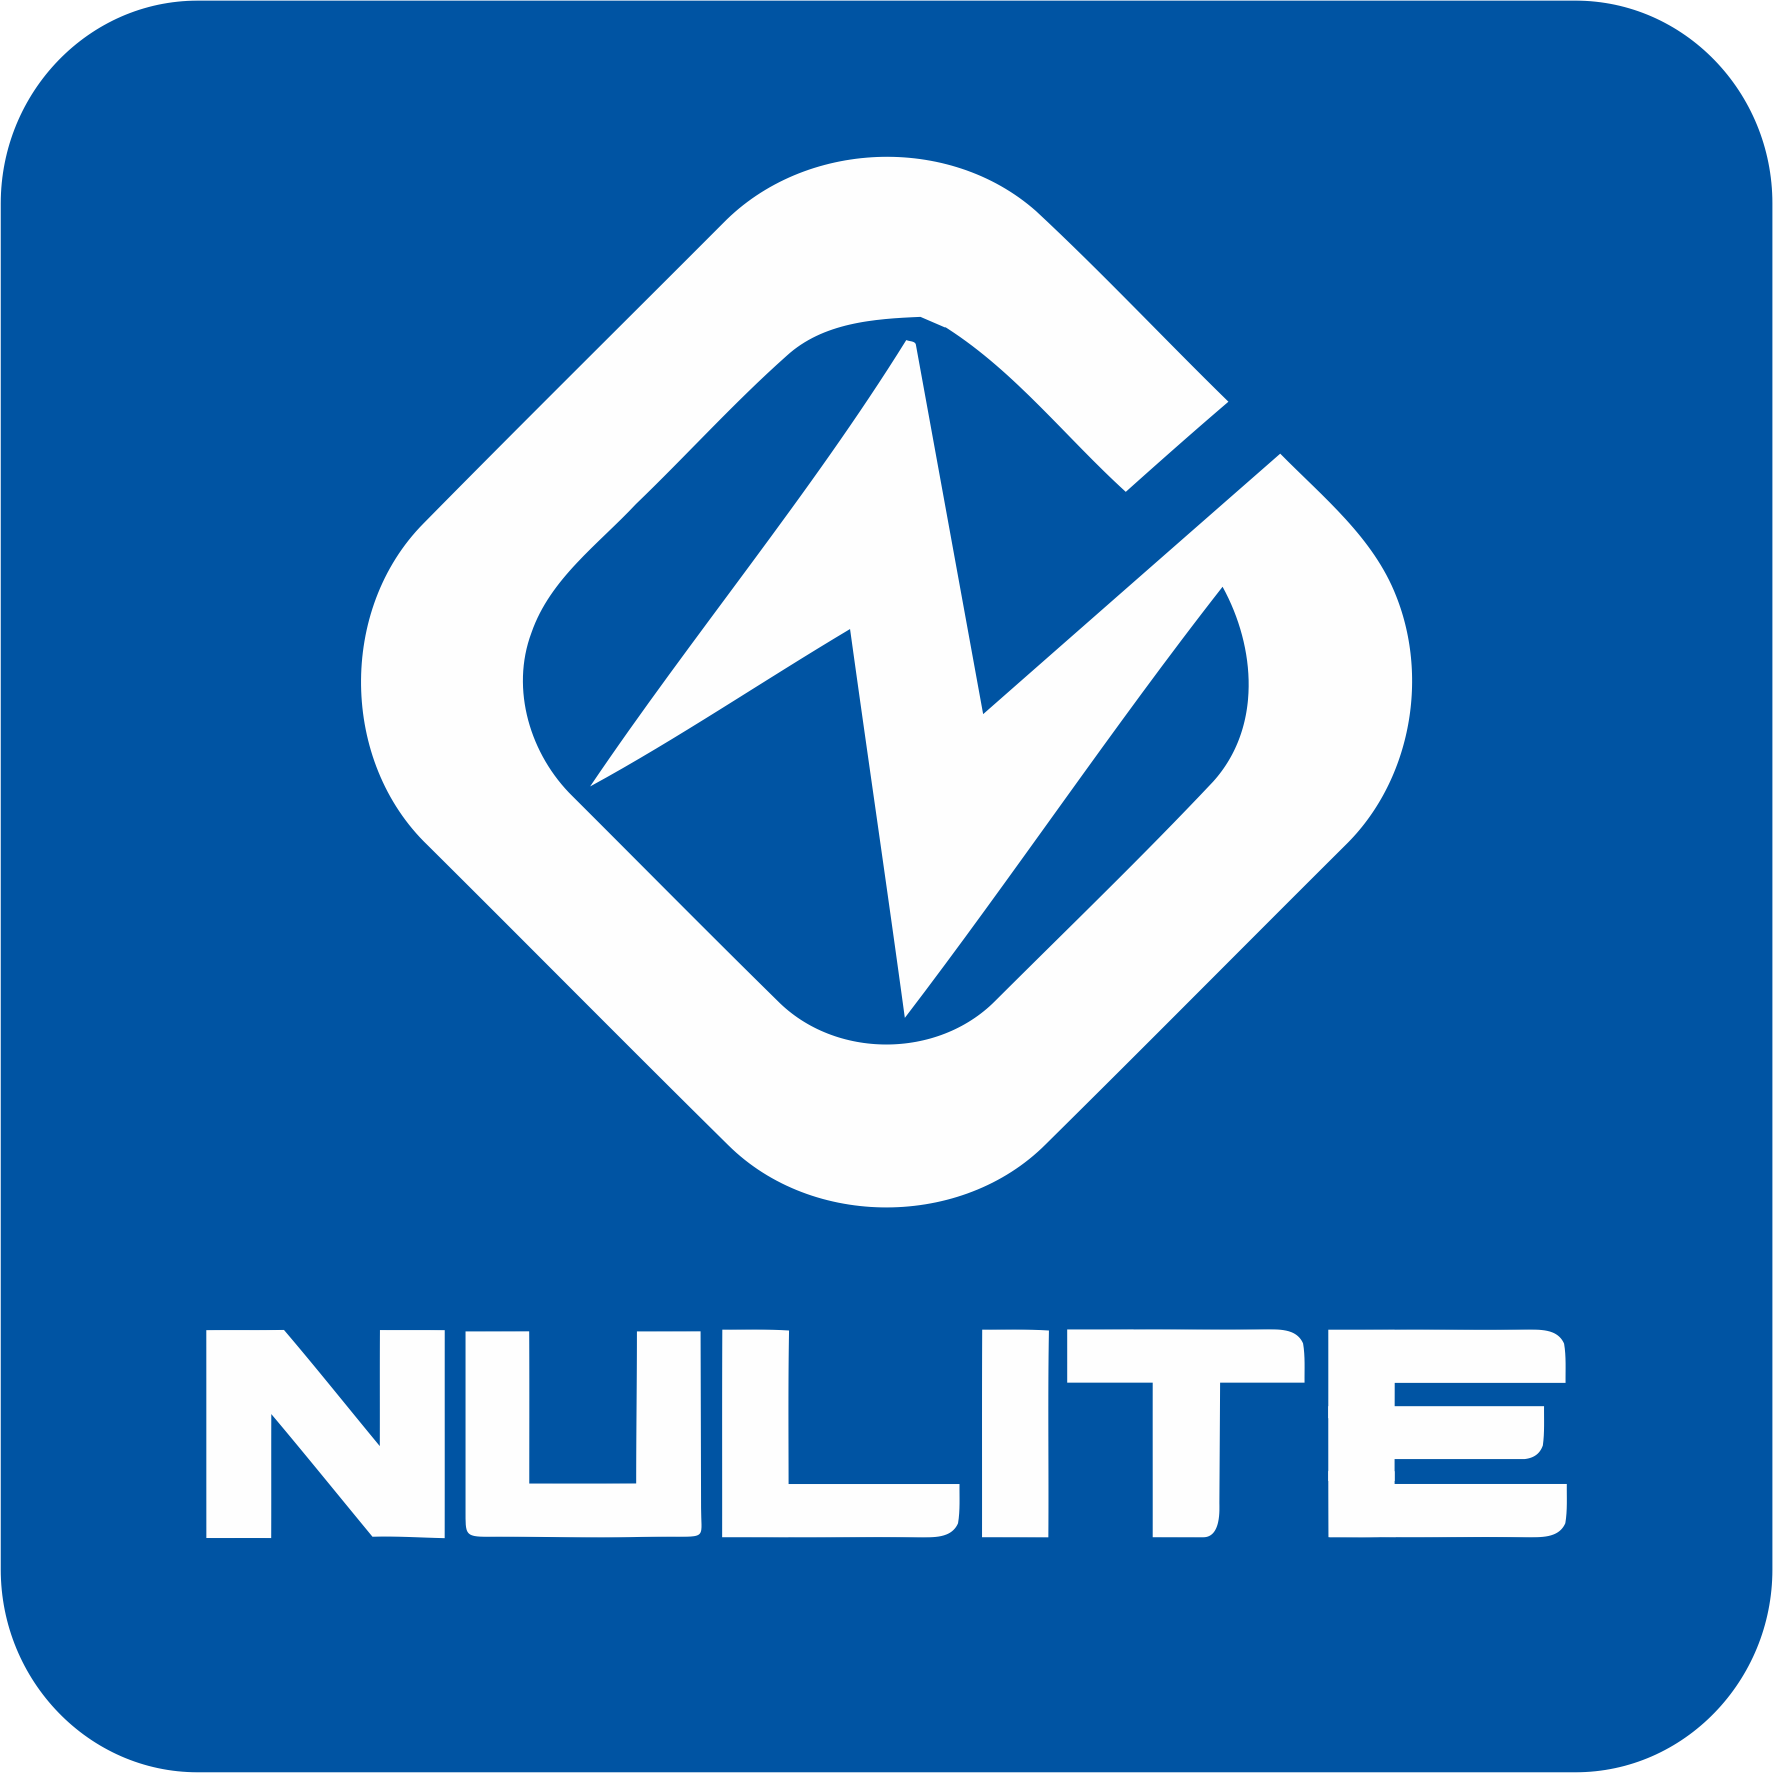 Commercial Heat Pump From Manufacturer, NEW ENERGY | NULITE - page 2